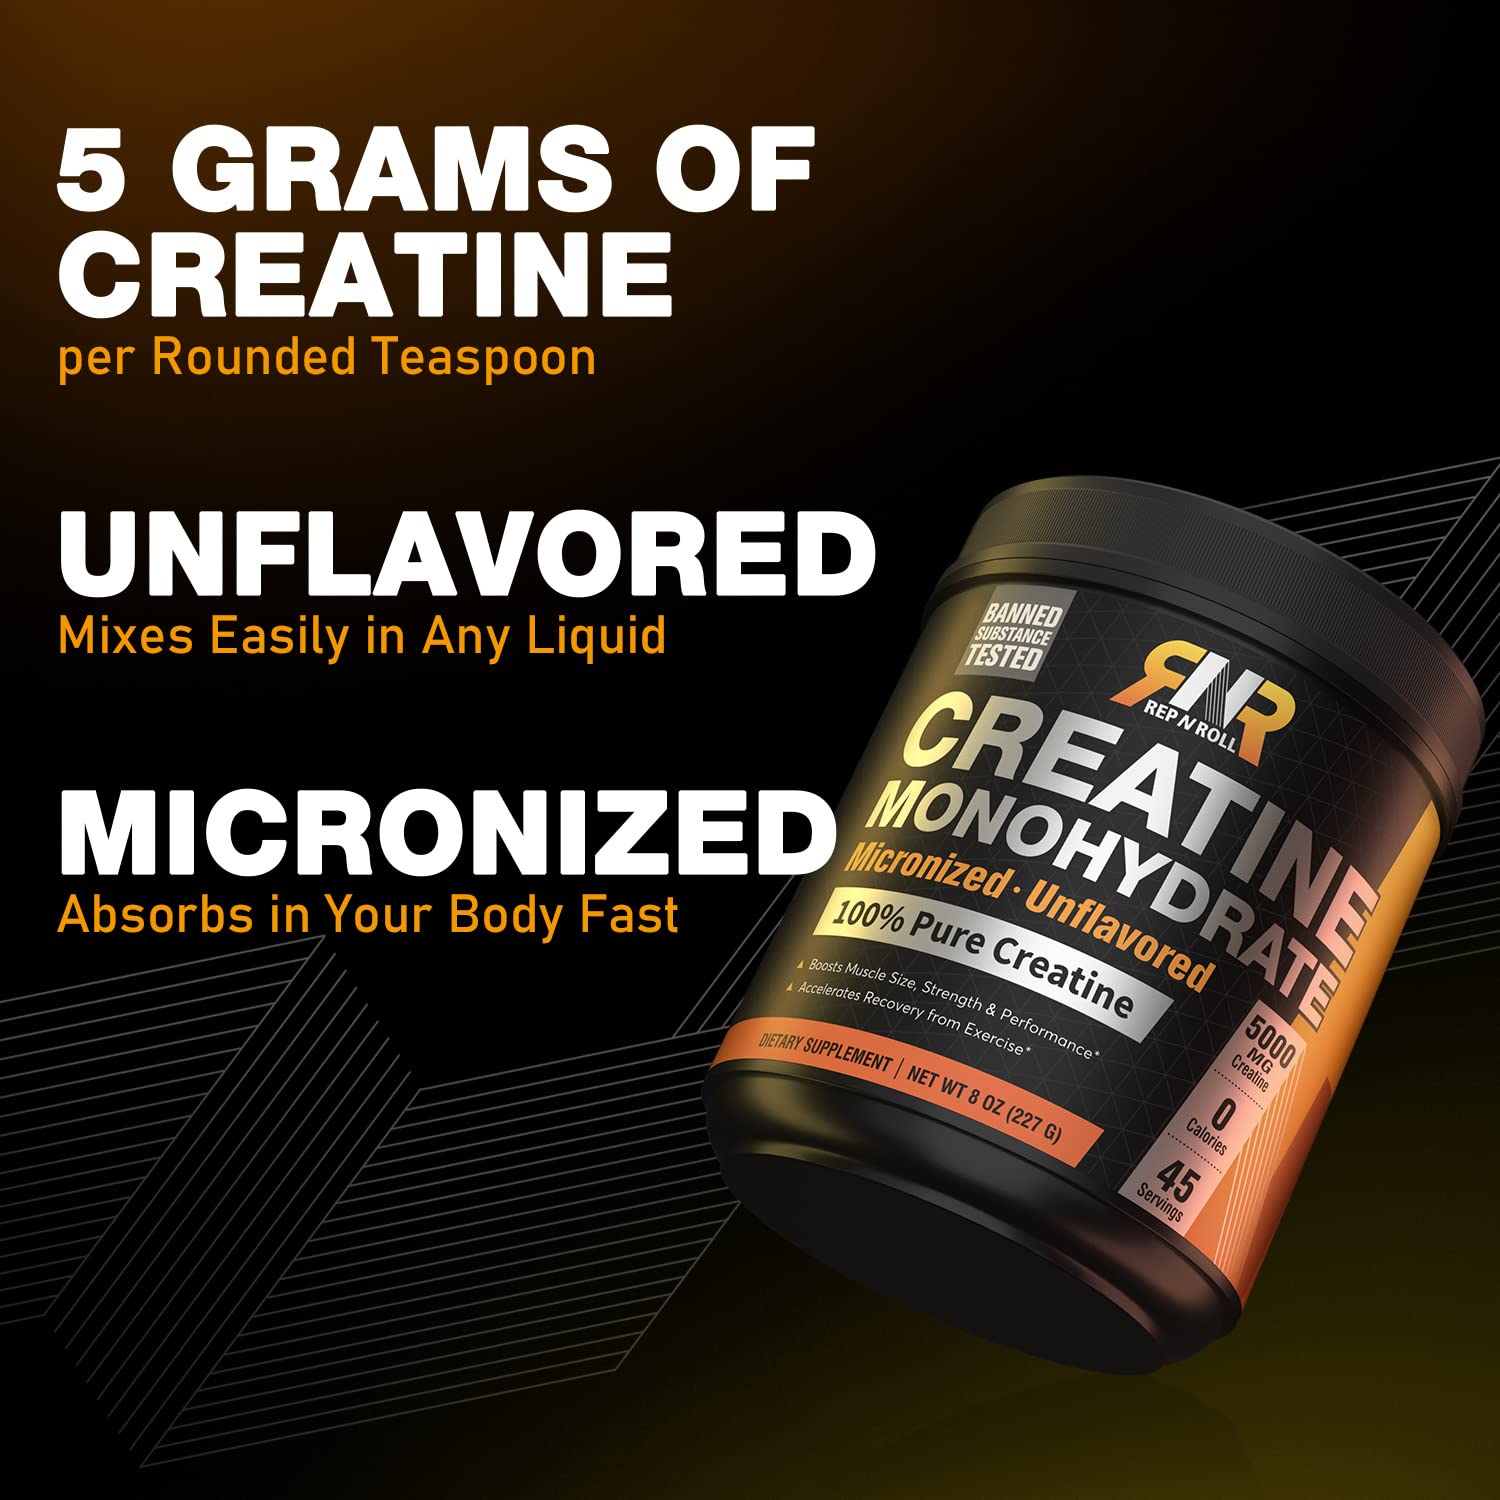 Micronized Creatine Powder (Unflavored), 45 Servings, 5000 MG Creatine Monohydrate, 0 Calories, 0 Sugar, 100% Purity Level, Banned Substance Tested, Keto Friendly, No Bloating, 8oz